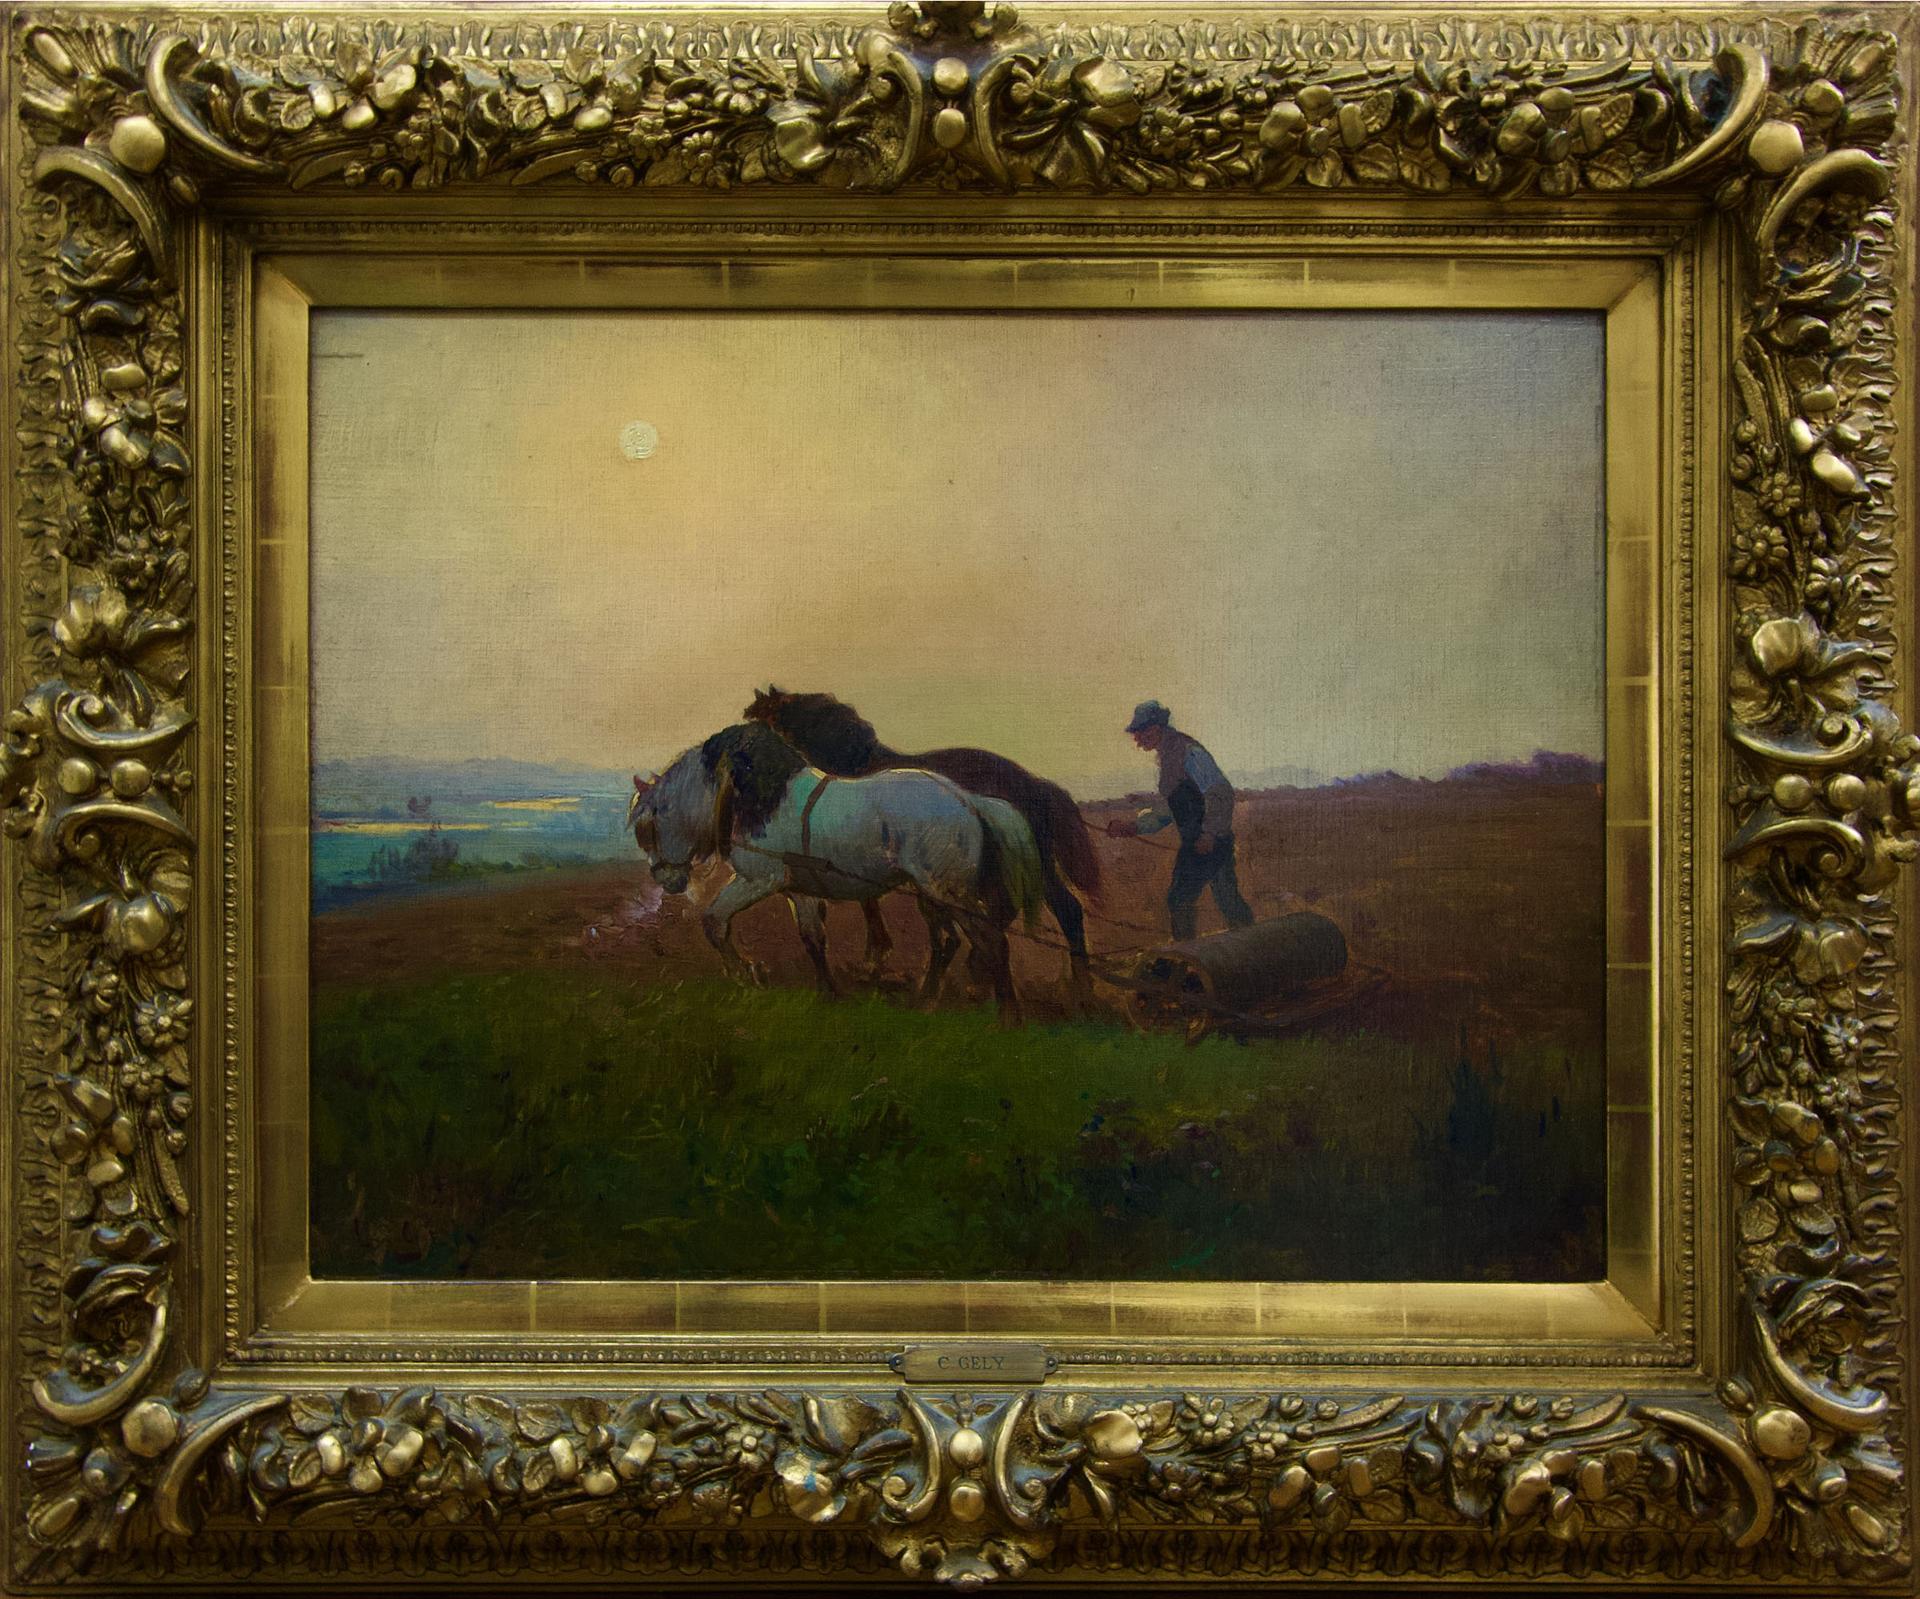 C. Gely - Untitled (Ploughing The Field At Dusk)